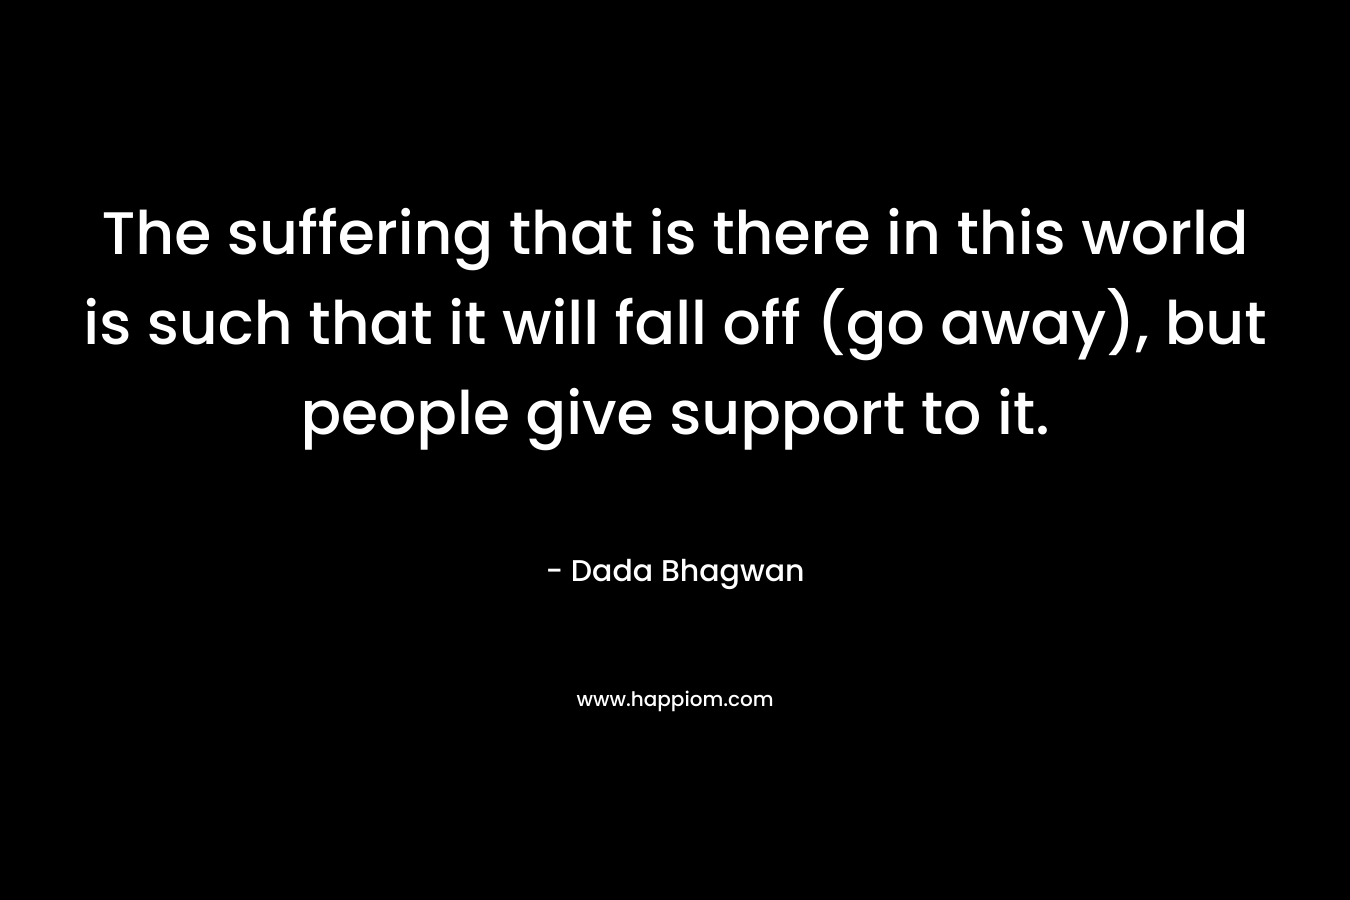 The suffering that is there in this world is such that it will fall off (go away), but people give support to it.